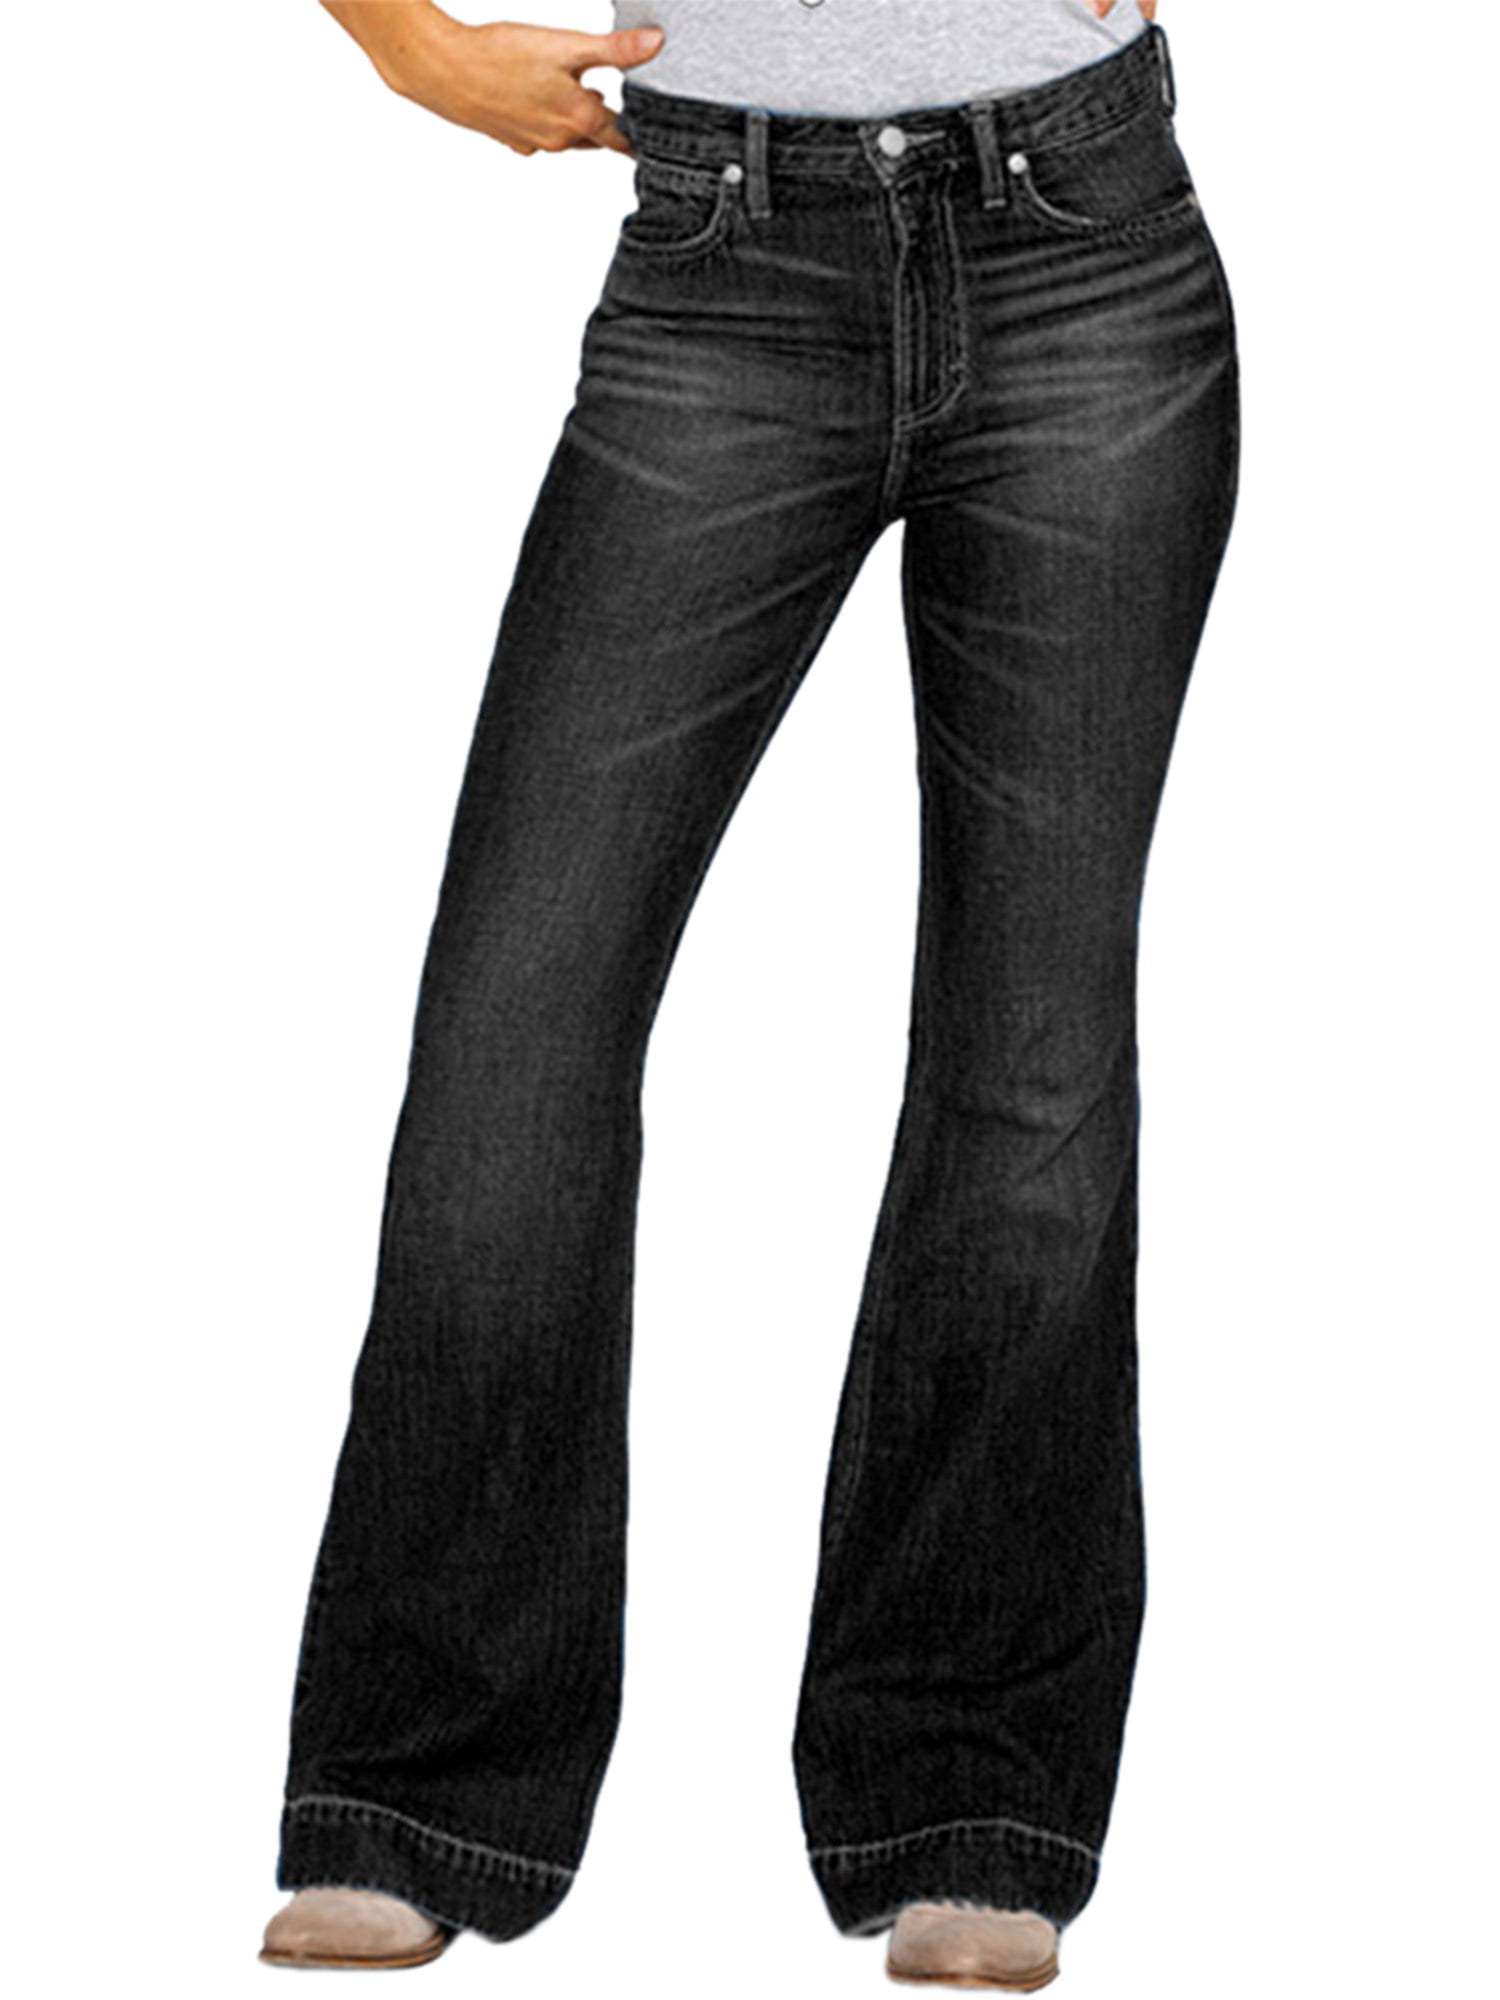 Women's Strenchy Flared Jeans High Waisted  Ladies Casual Boot Cut Denim Pants